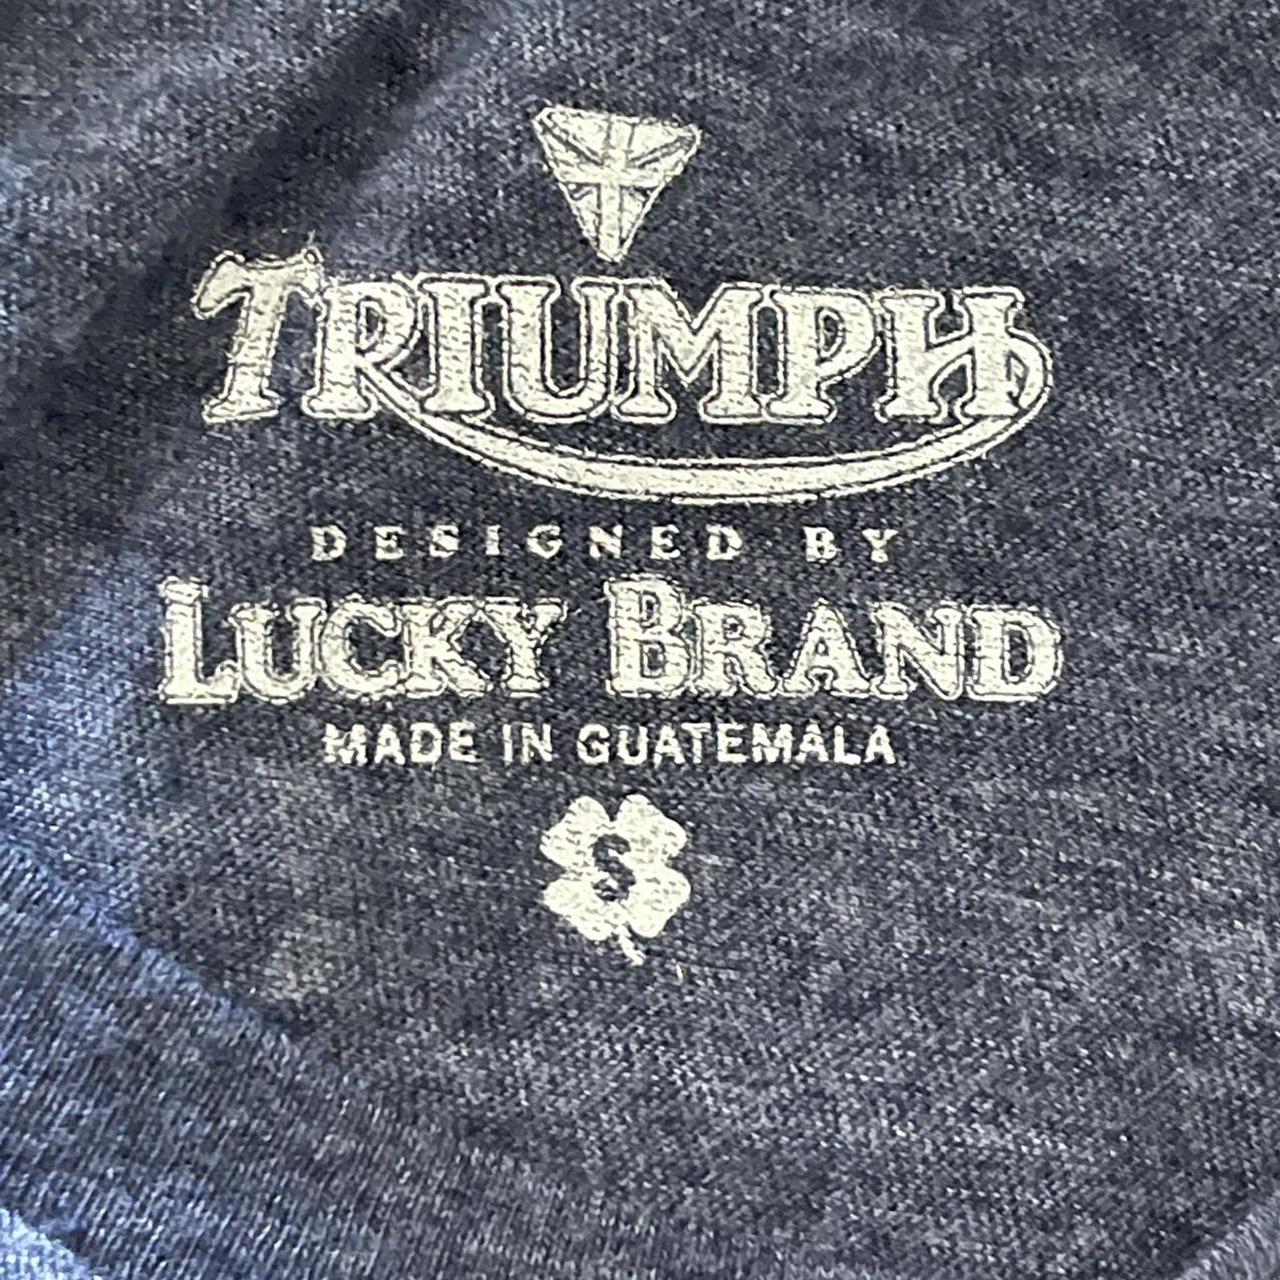 Lucky Brand Triumph Bade Bike Tee, Shirts, Clothing & Accessories